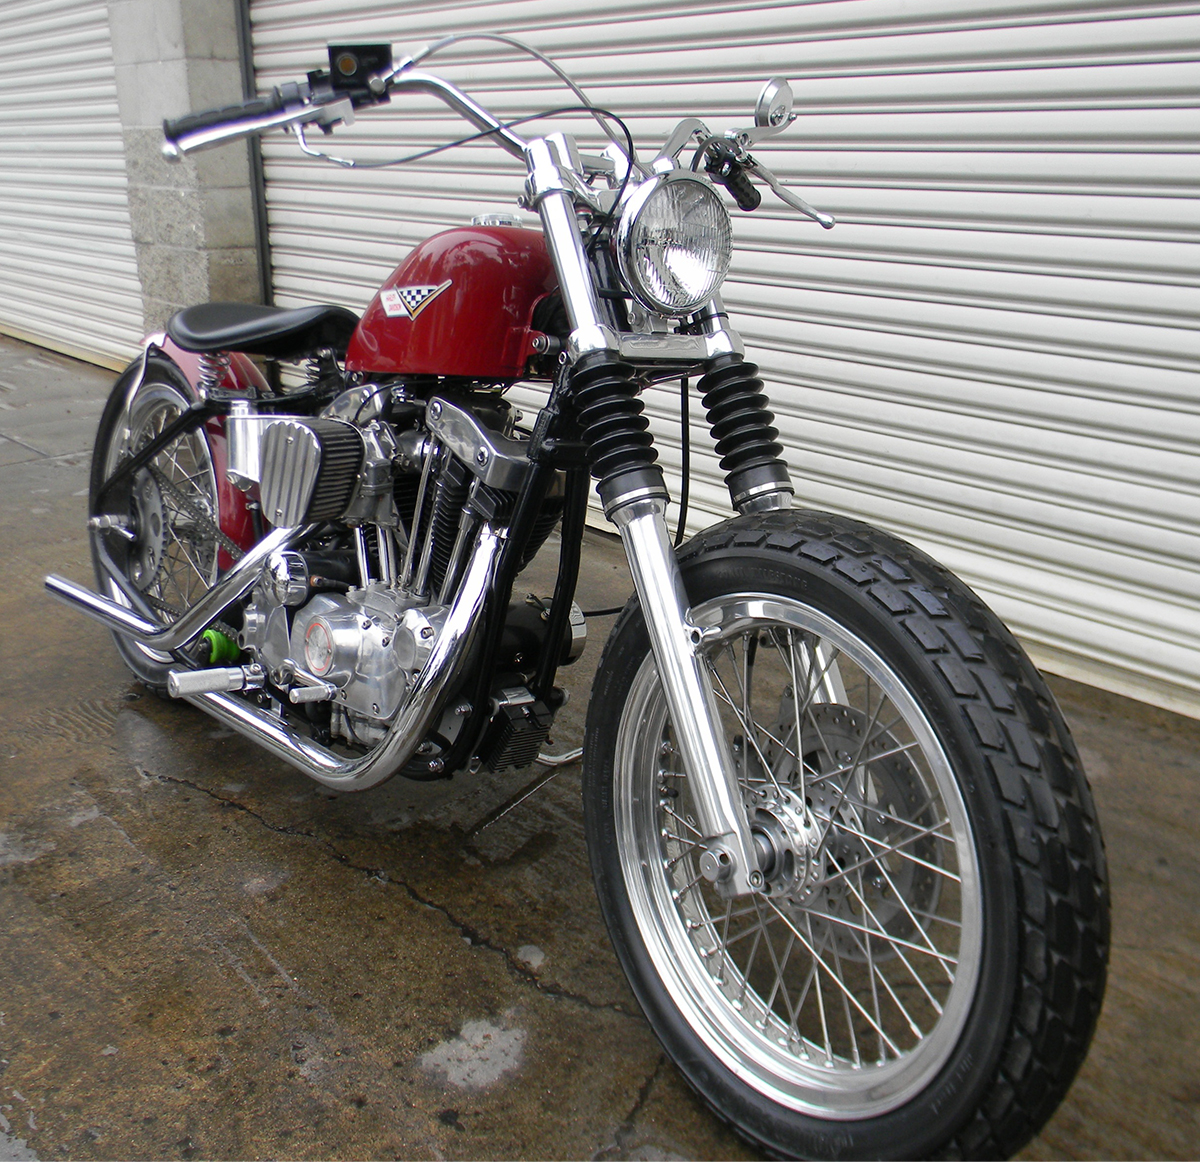 709cycles.com 1972 XLH Sportster img3578